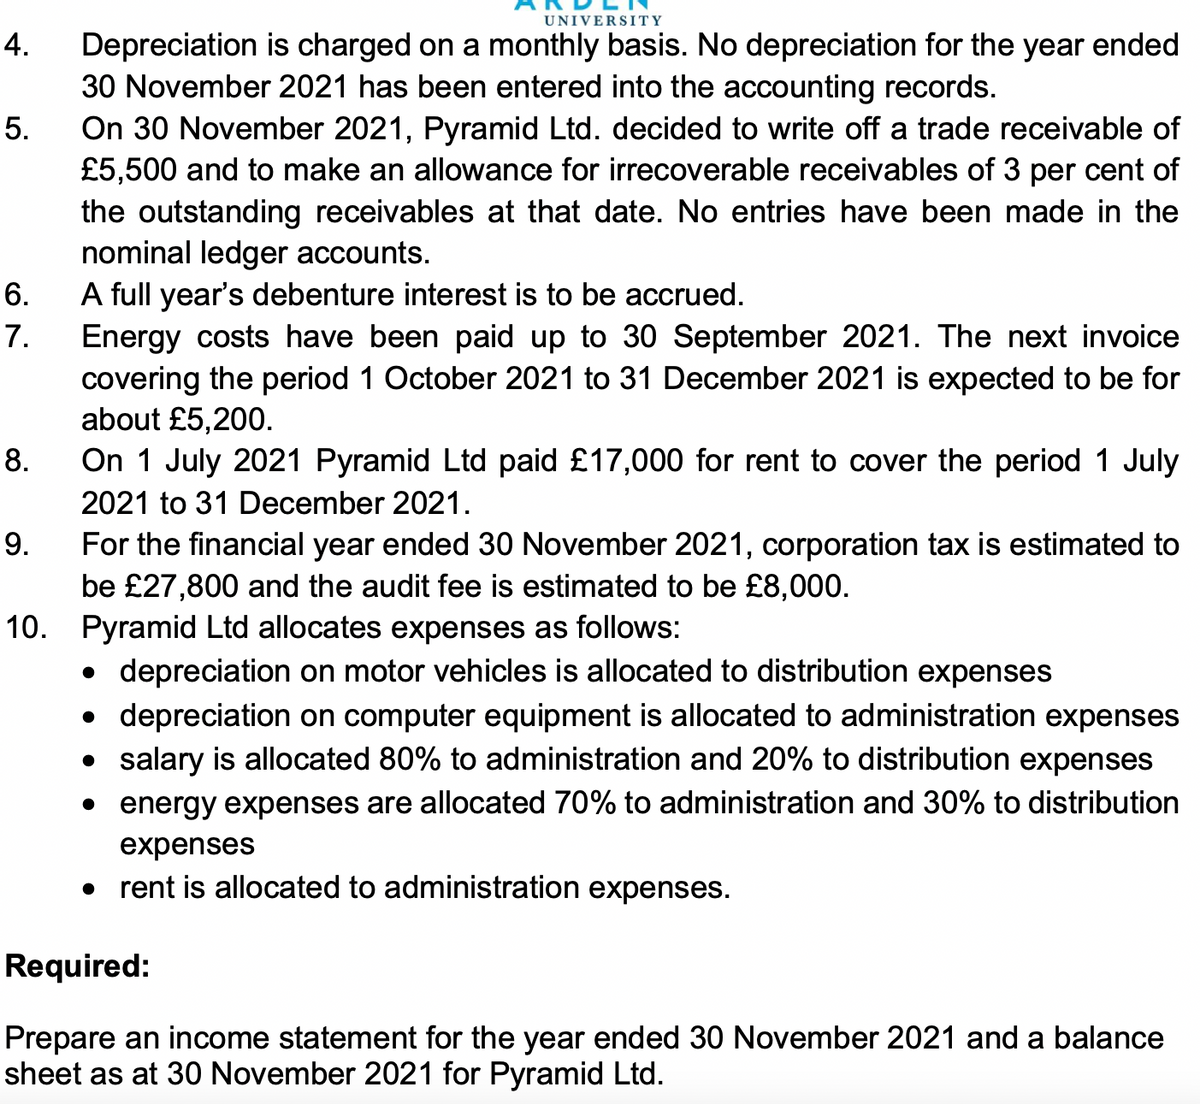 UNIVERSITY
4.
Depreciation is charged on a monthly basis. No depreciation for the year ended
30 November 2021 has been entered into the accounting records.
On 30 November 2021, Pyramid Ltd. decided to write off a trade receivable of
£5,500 and to make an allowance for irrecoverable receivables of 3 per cent of
the outstanding receivables at that date. No entries have been made in the
nominal ledger accounts.
A full year's debenture interest is to be accrued.
5.
6.
7.
Energy costs have been paid up to 30 September 2021. The next invoice
covering the period 1 October 2021 to 31 December 2021 is expected to be for
about £5,200.
8.
On 1 July 2021 Pyramid Ltd paid £17,000 for rent to cover the period 1 July
2021 to 31 December 2021.
9.
For the financial year ended 30 November 2021, corporation tax is estimated to
be £27,800 and the audit fee is estimated to be £8,000.
10. Pyramid Ltd allocates expenses as follows:
• depreciation on motor vehicles is allocated to distribution expenses
• depreciation on computer equipment is allocated to administration expenses
• salary is allocated 80% to administration and 20% to distribution expenses
• energy expenses are allocated 70% to administration and 30% to distribution
expenses
• rent is allocated to administration expenses.
Required:
Prepare an income statement for the year ended 30 November 2021 and a balance
sheet as at 30 November 2021 for Pyramid Ltd.
